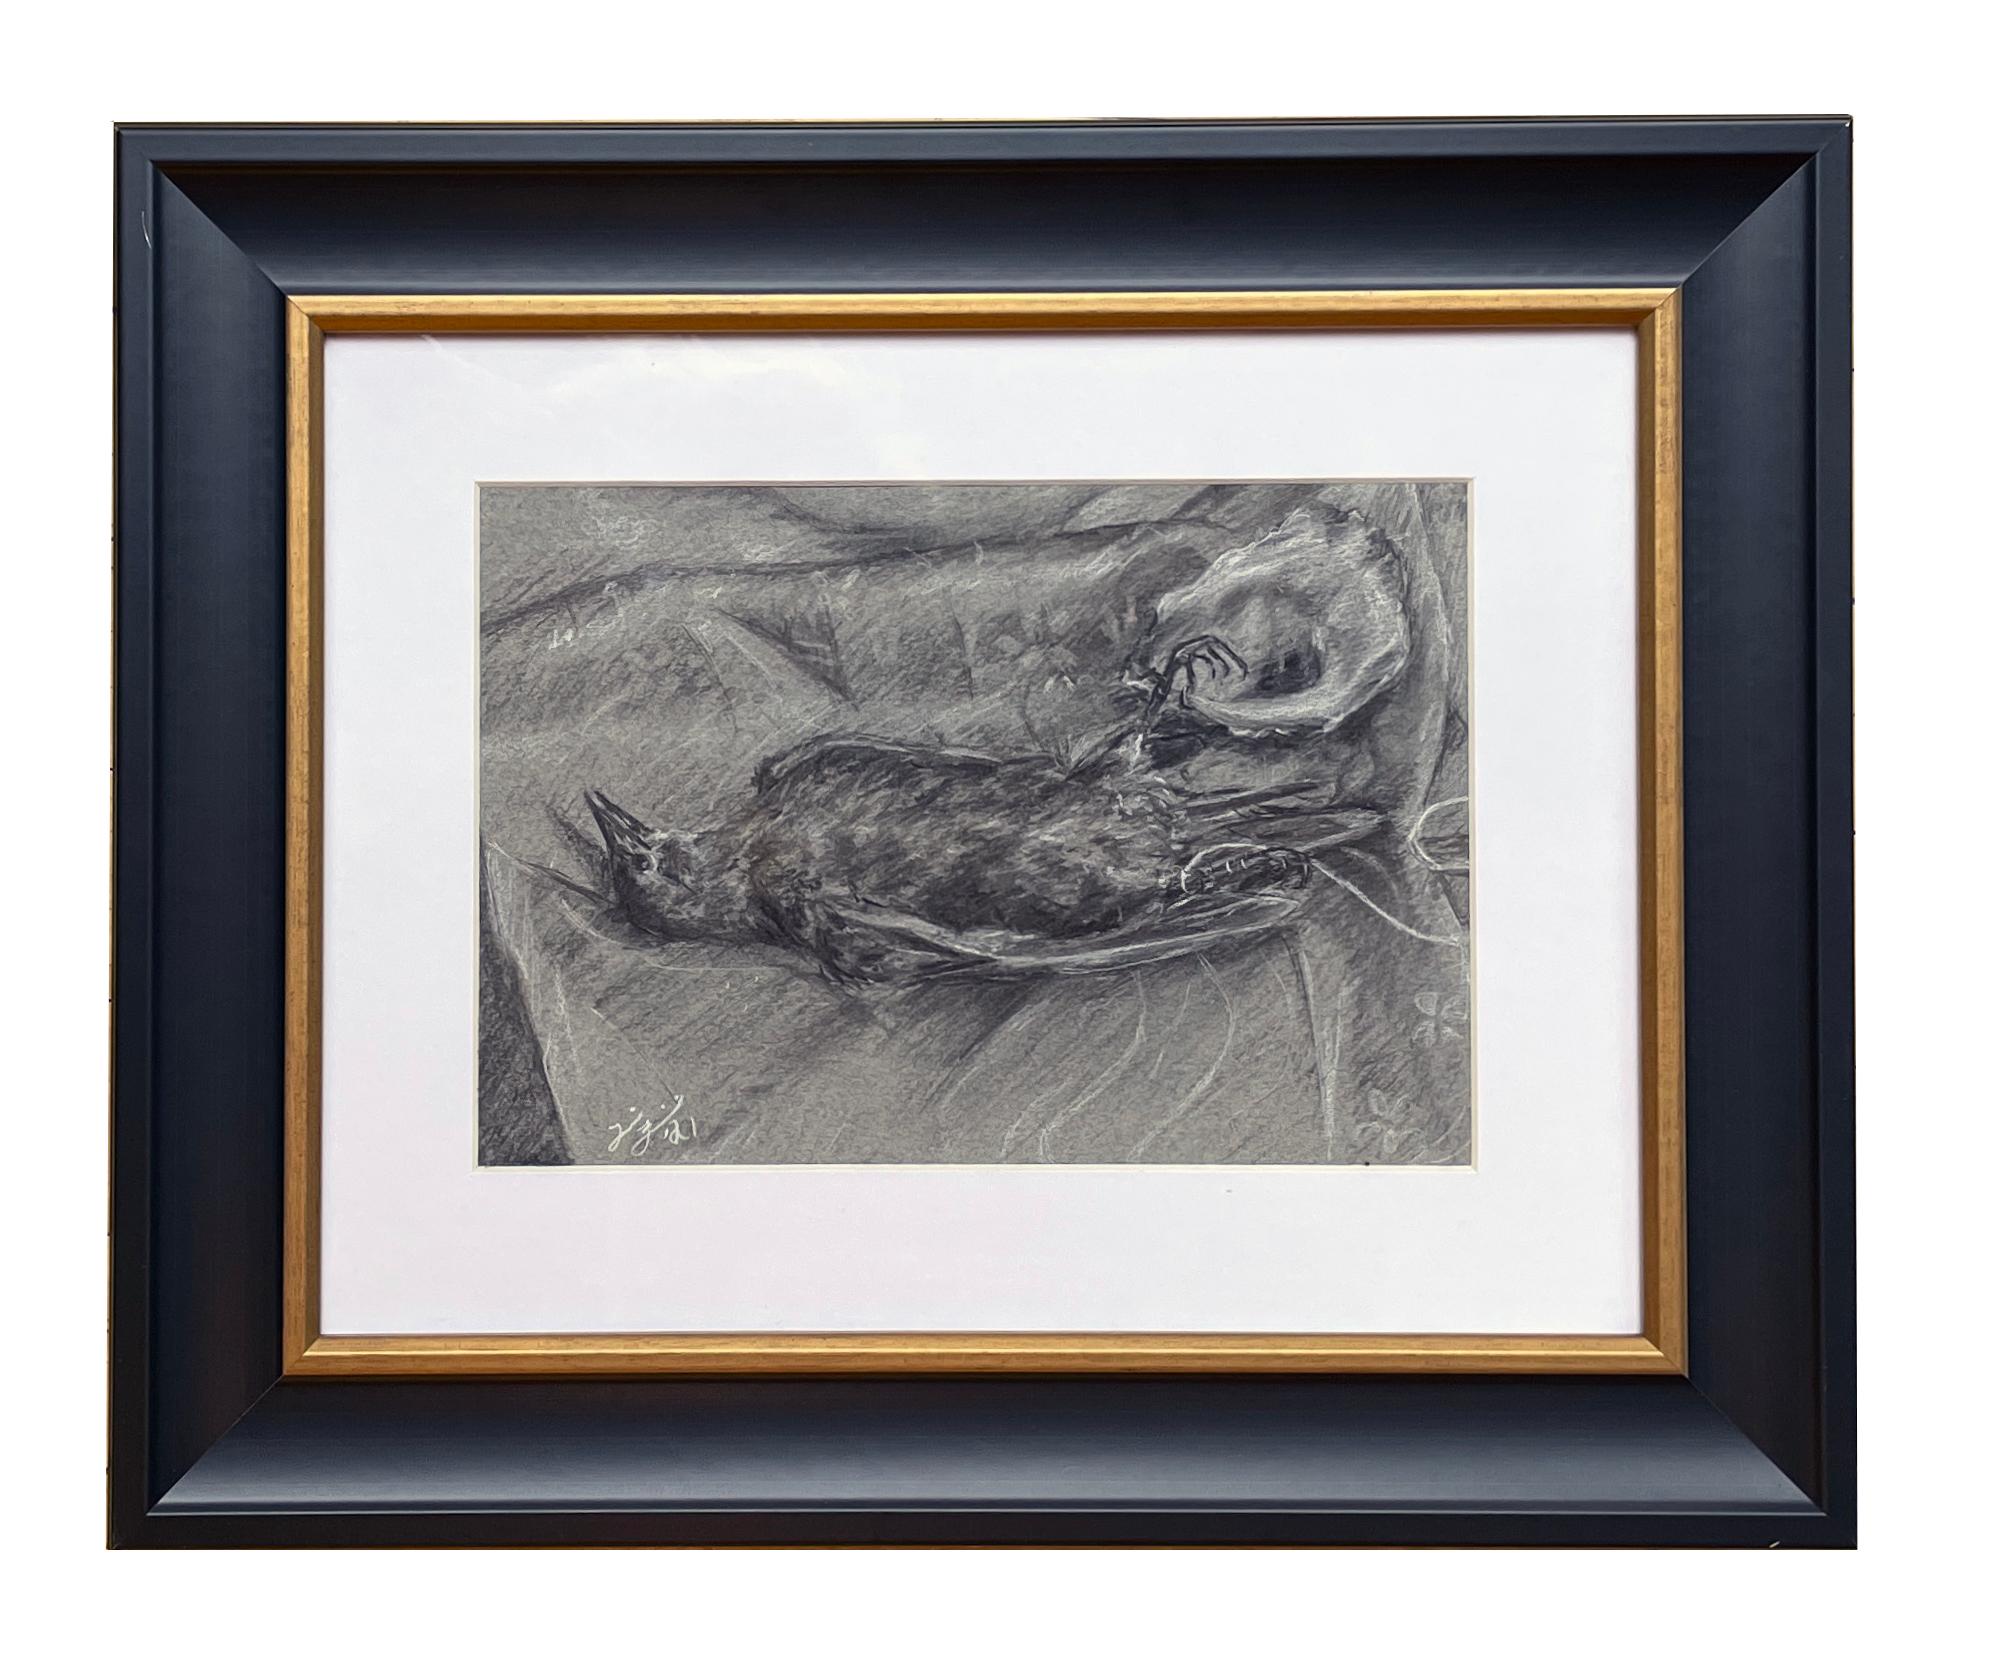 Tina Figarelli Animal Art - L'Ucello Study - Original Charcoal Study of a Bird on Toned Paper, Framed